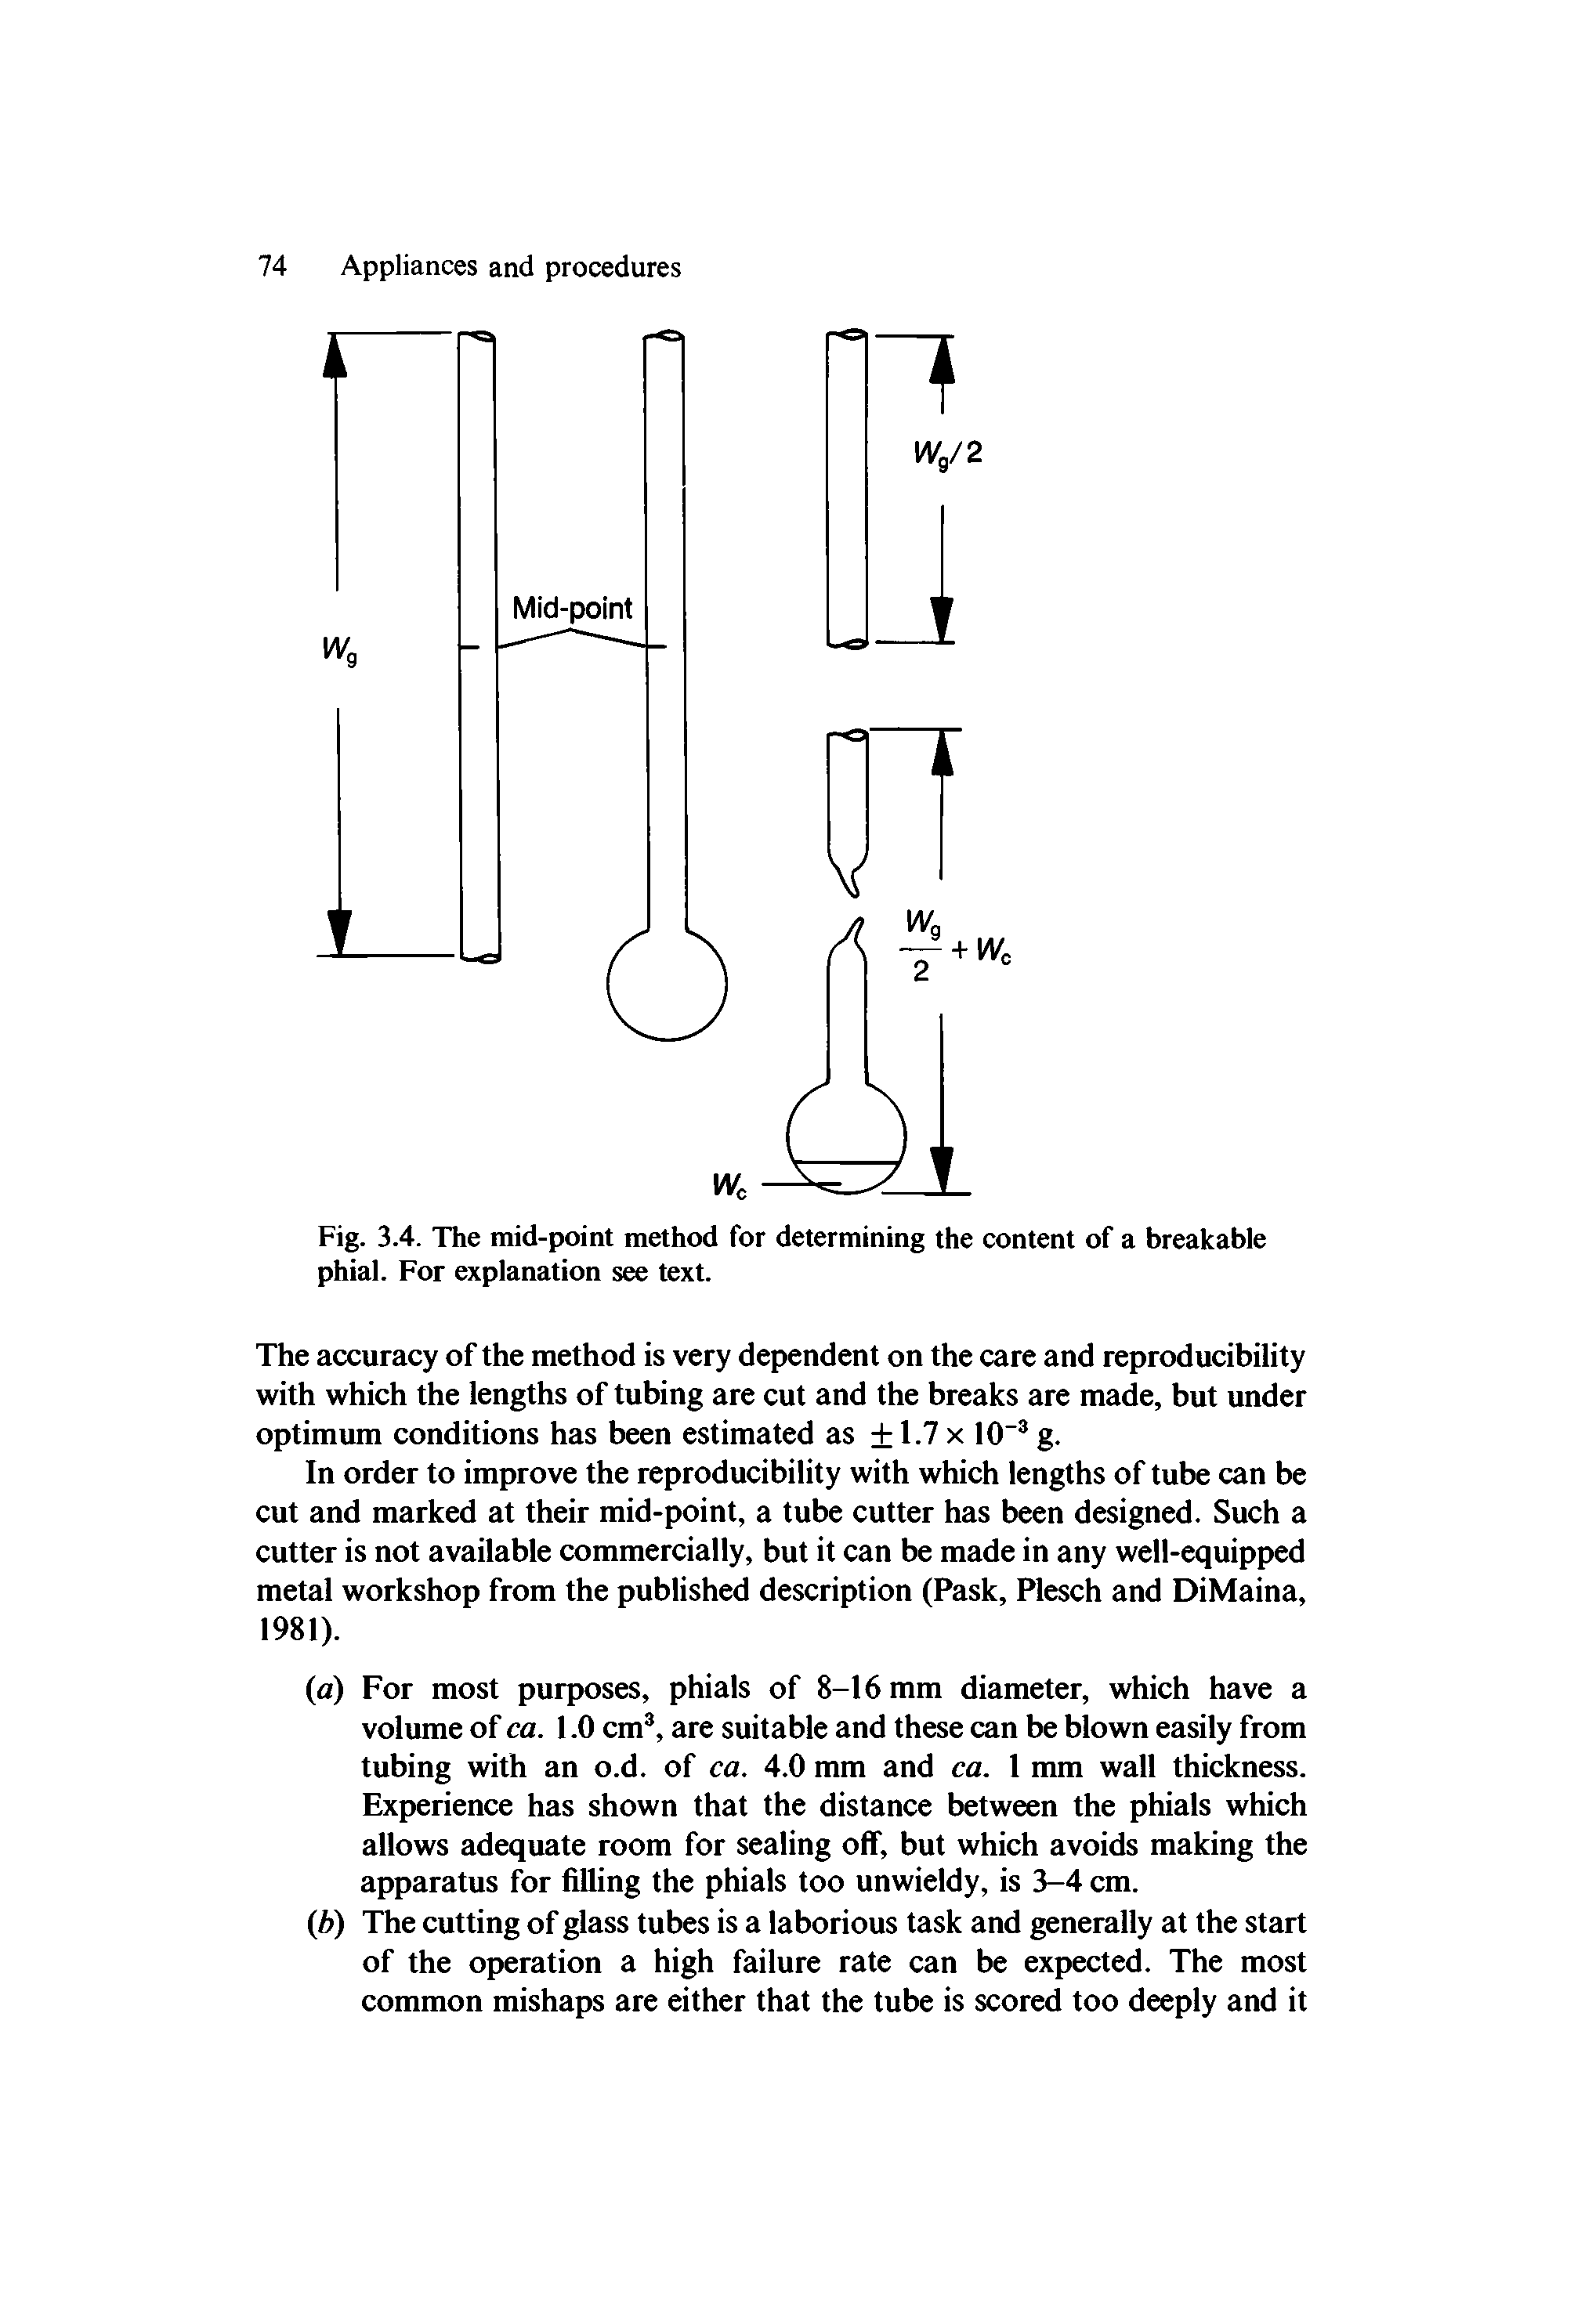 Fig. 3.4. The mid-point method for determining the content of a breakable phial. For explanation see text.